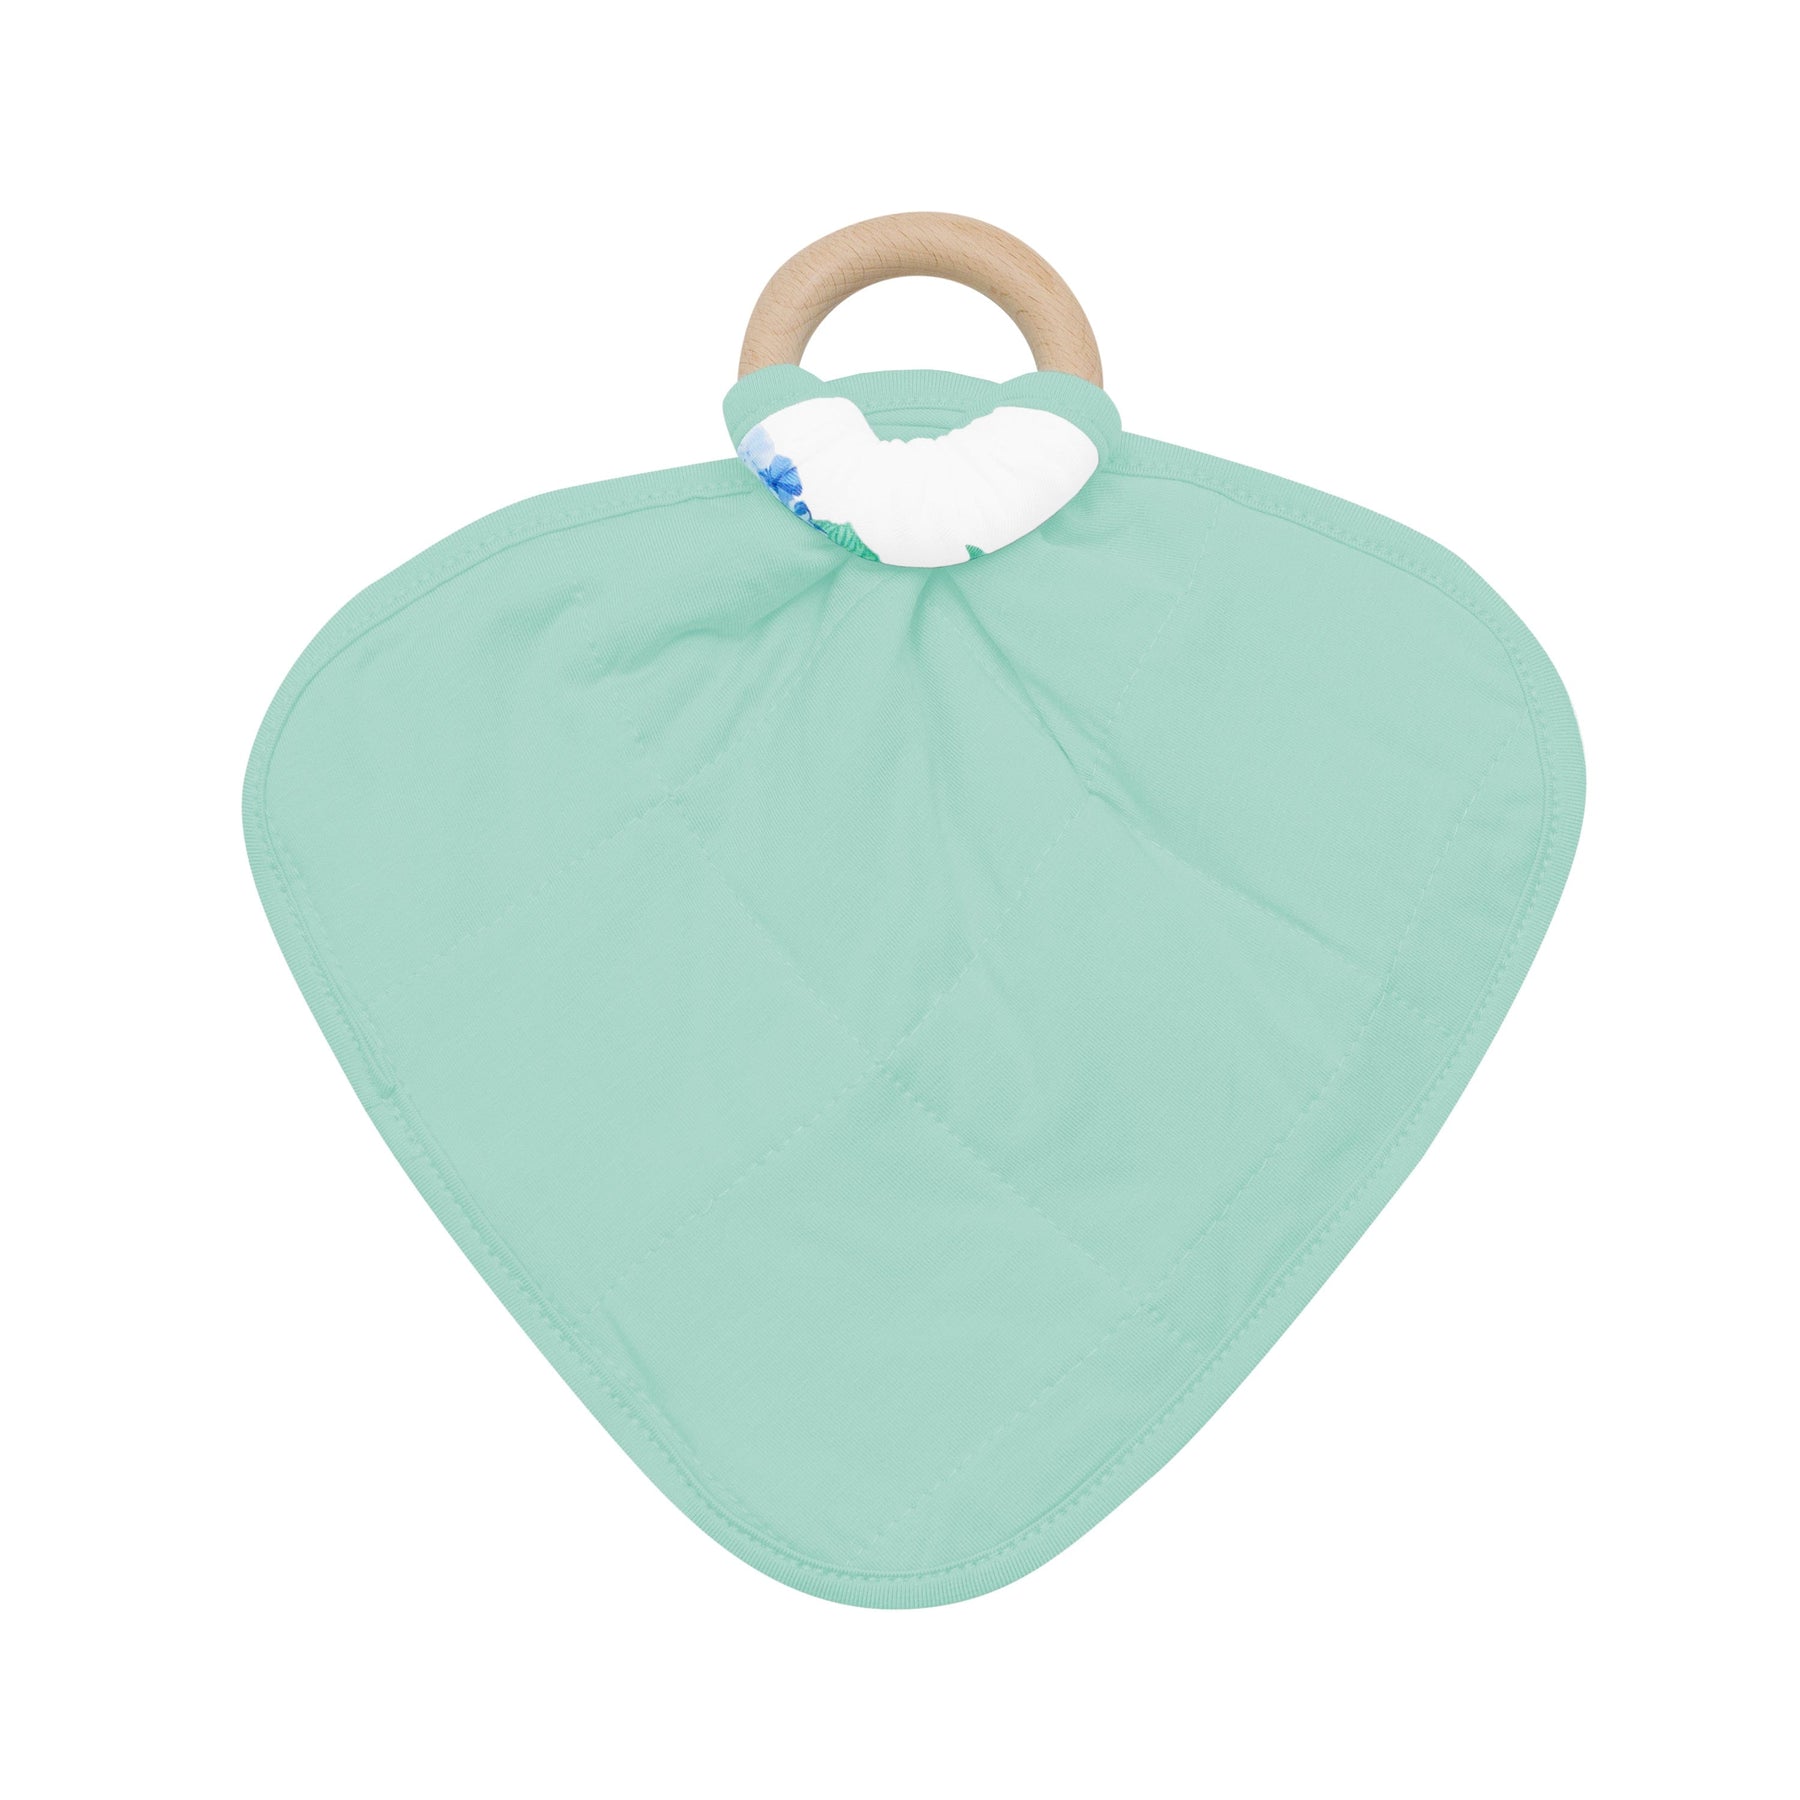 Kyte Baby Lovey Hydrangea / Infant Lovey in Hydrangea with Removable Teething Ring